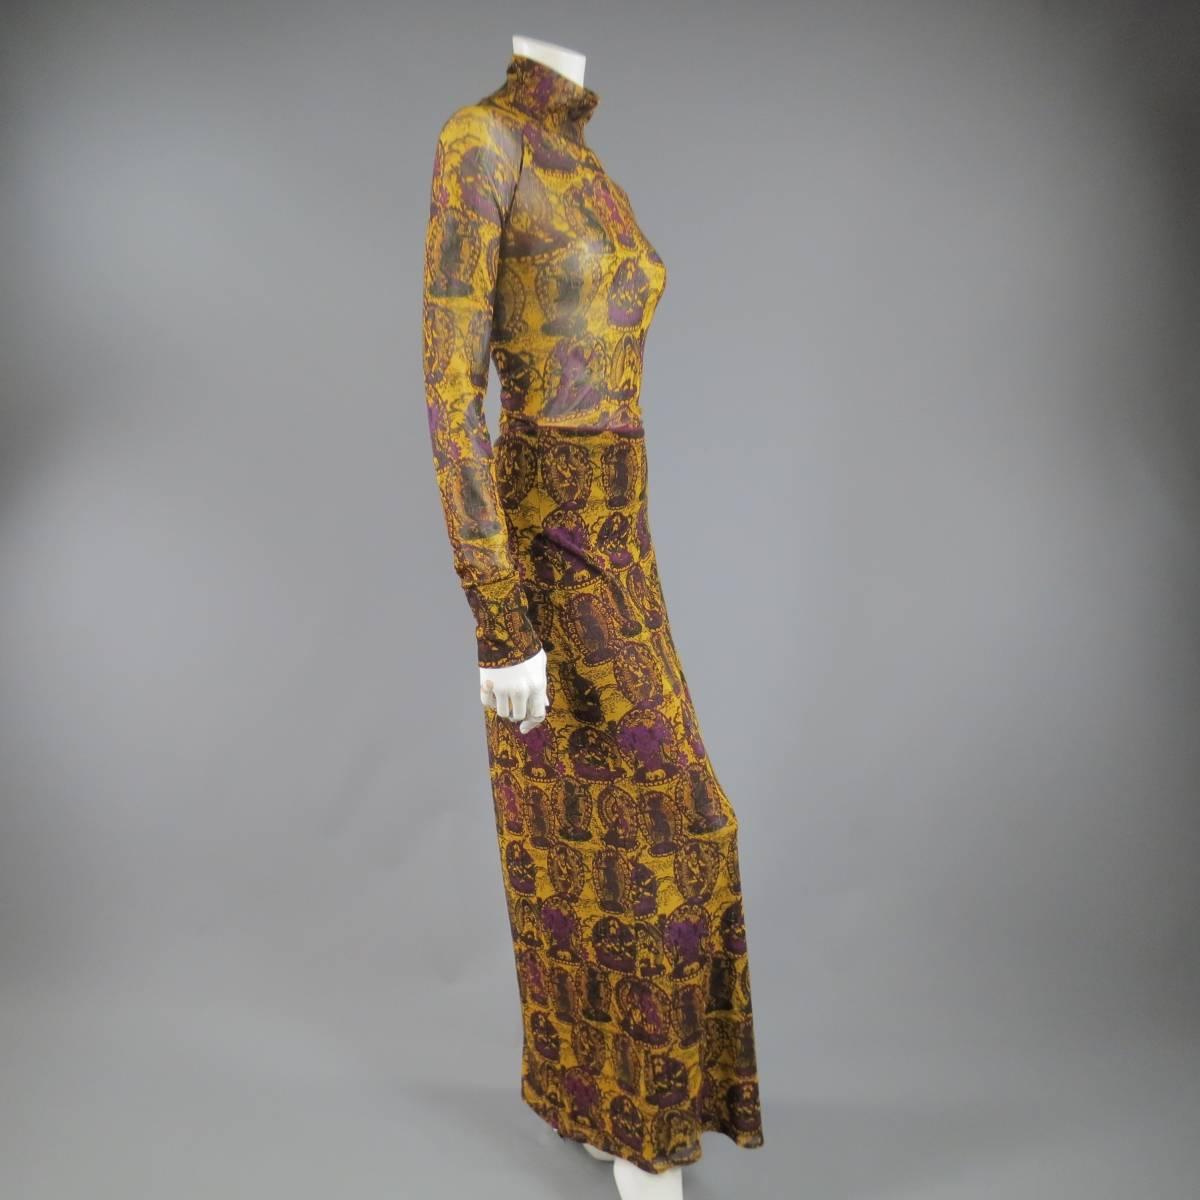 This fabulous VIVIENNE TAM skirt set includes a turtle neck and full length maxi skirt in a gorgeous all over purple and mustard Buddhist print stretch micro mesh.
 
Very Good Pre-Owned Condition.
Marked: 3
 
Measurements:
 
Top:
Shoulder:16